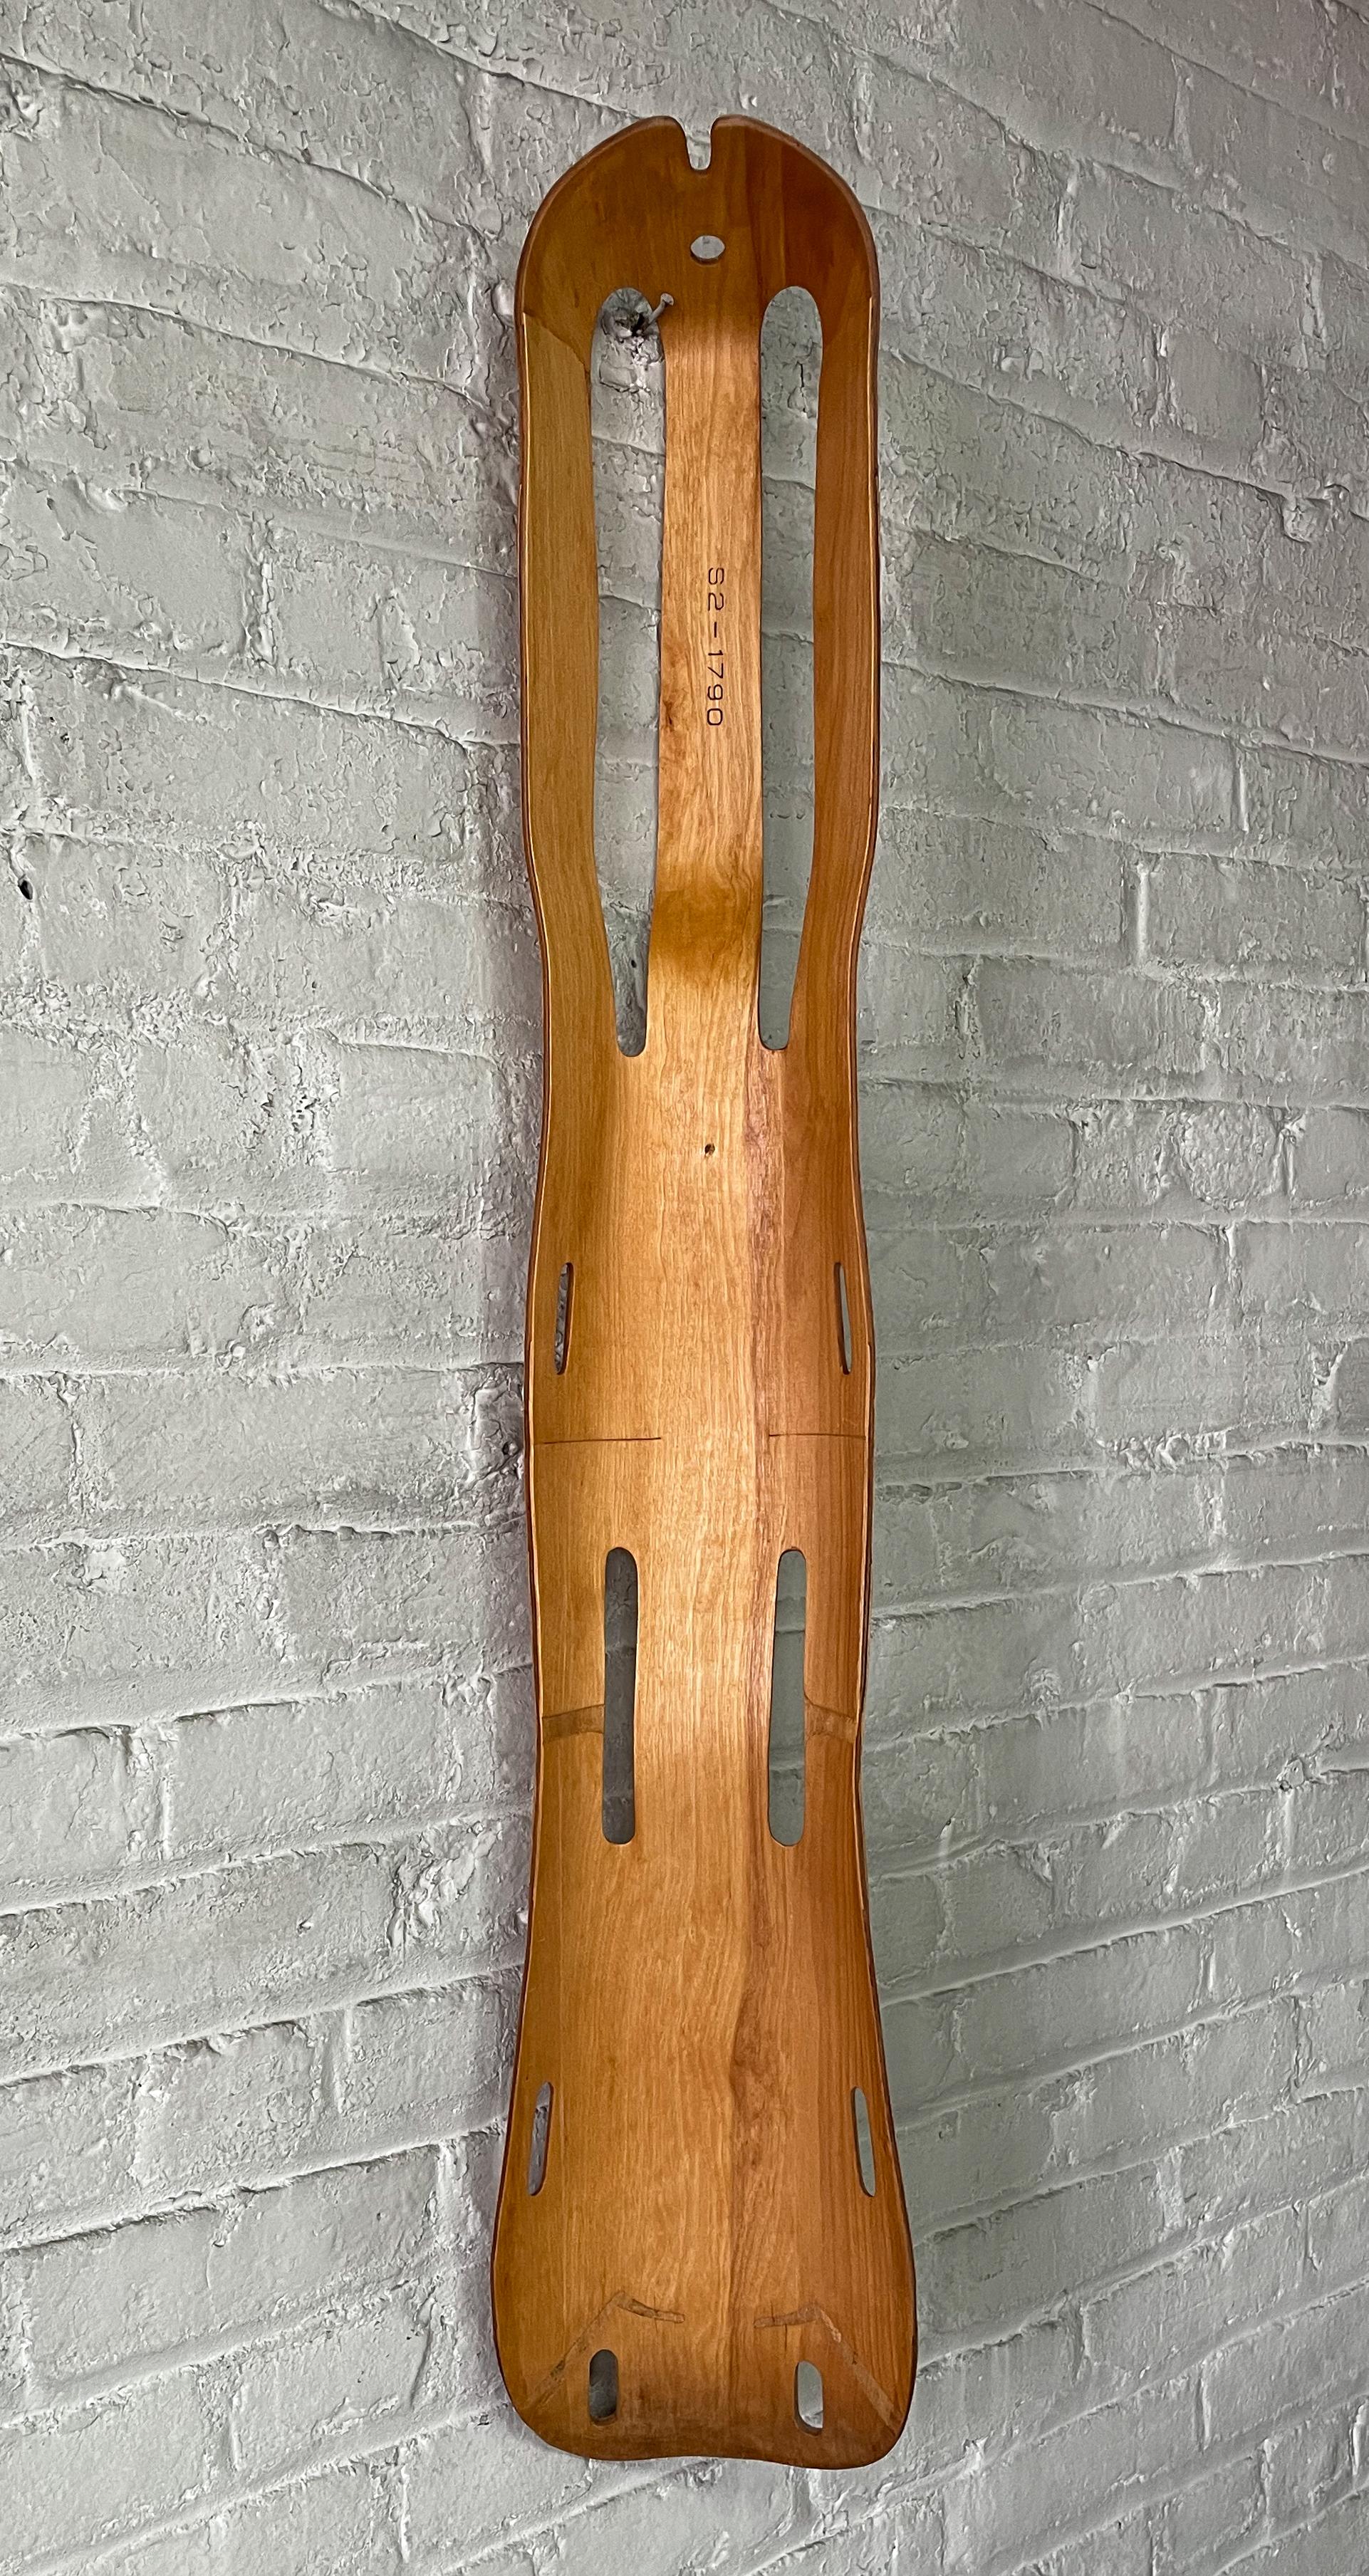 Leg splint of molded mahogany plywood designed by Charles and Ray Eames and produced by Evans Products Company of Venice, California. The Eames's first mass-production success, the leg splint was sold to the U.S. Navy during WWII. It corresponded